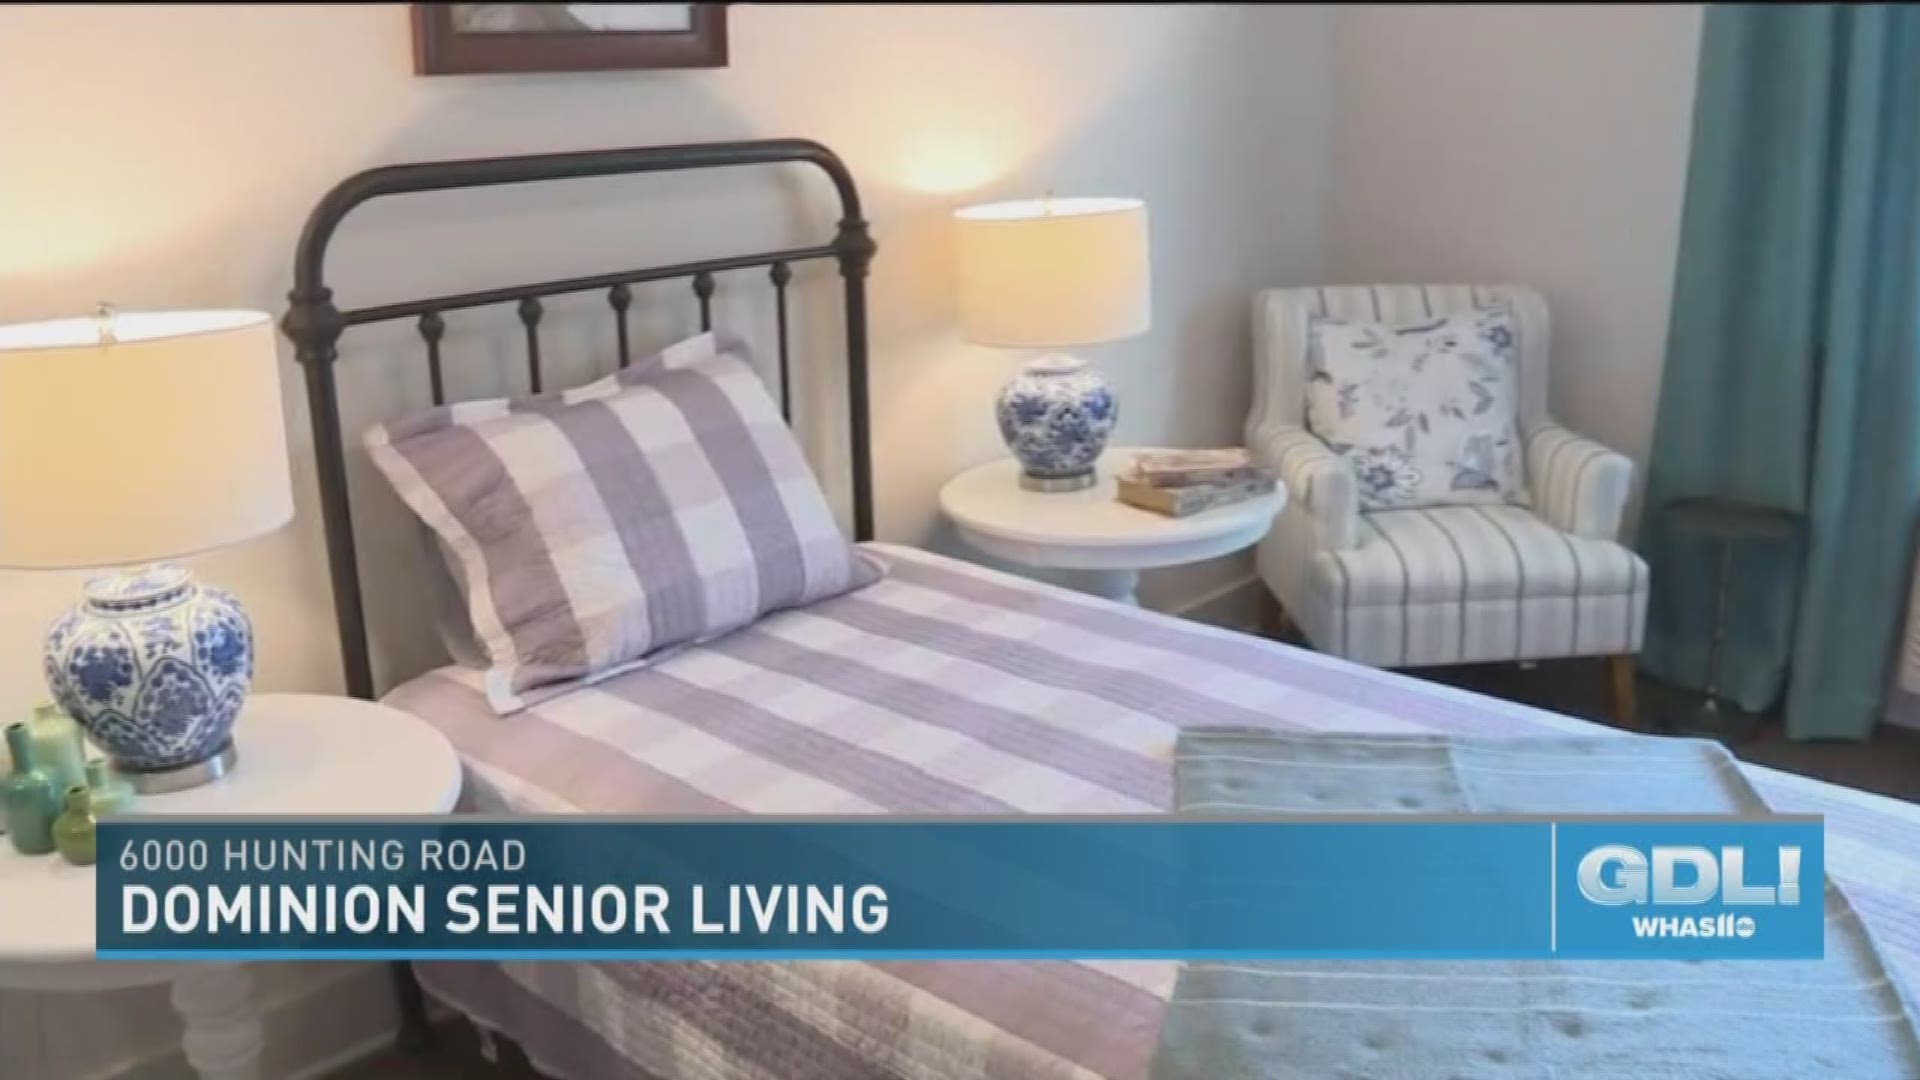 Dominion Senior Living is located at 6000 Hunting Road in Louisville, KY. For more information, call 502-373-4747 or go to DominionLouisville.com.